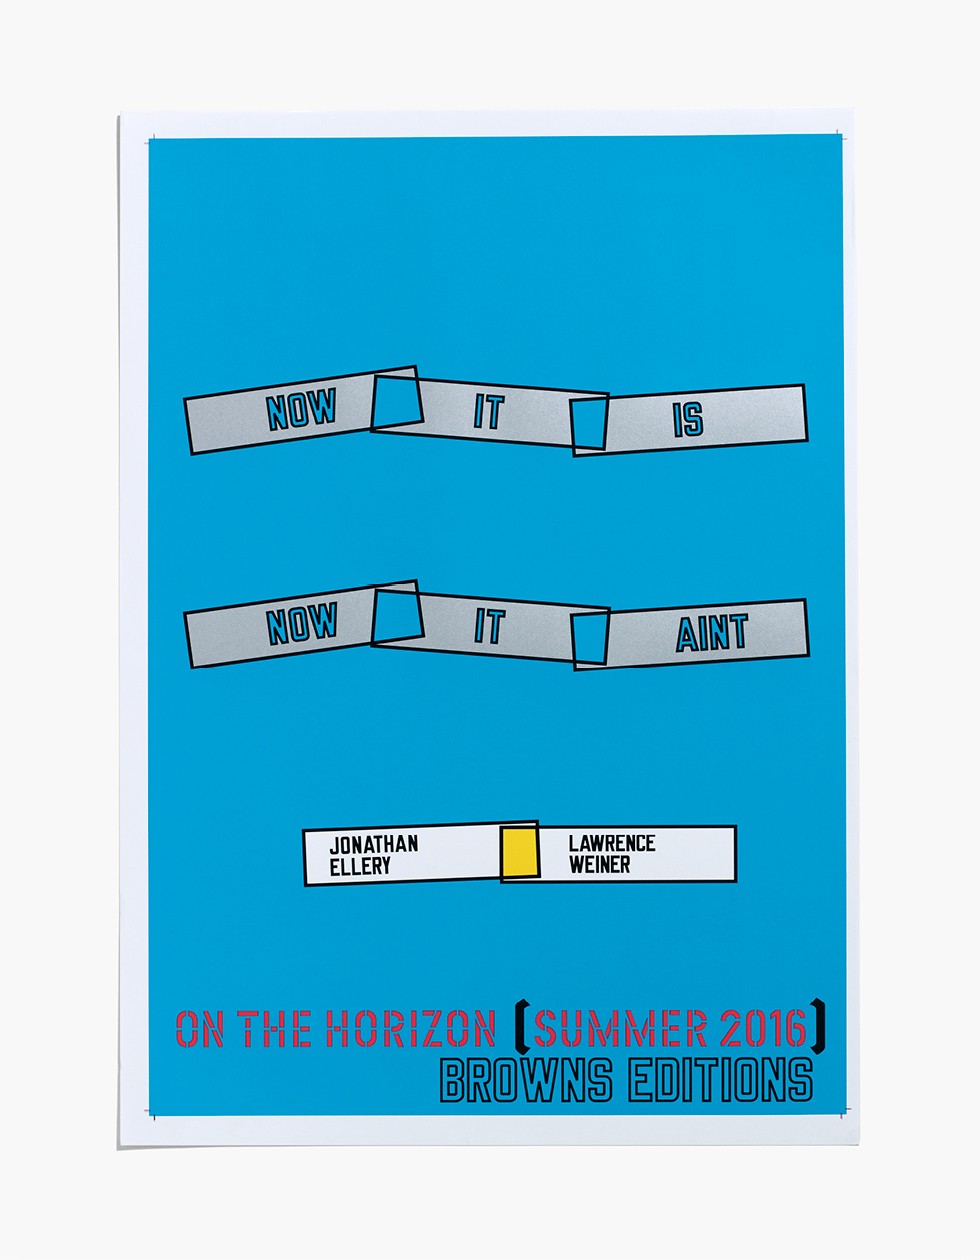 Jonathan Ellery, Jonathan Ellery Art, Jonathan Ellery Artist, Jonathan Ellery Work, Jonathan Ellery Book, Jonathan Ellery Exhibition, Jonathan Ellery Performance, onathan Ellery Lawrence Weiner Now It Is Now It Aint